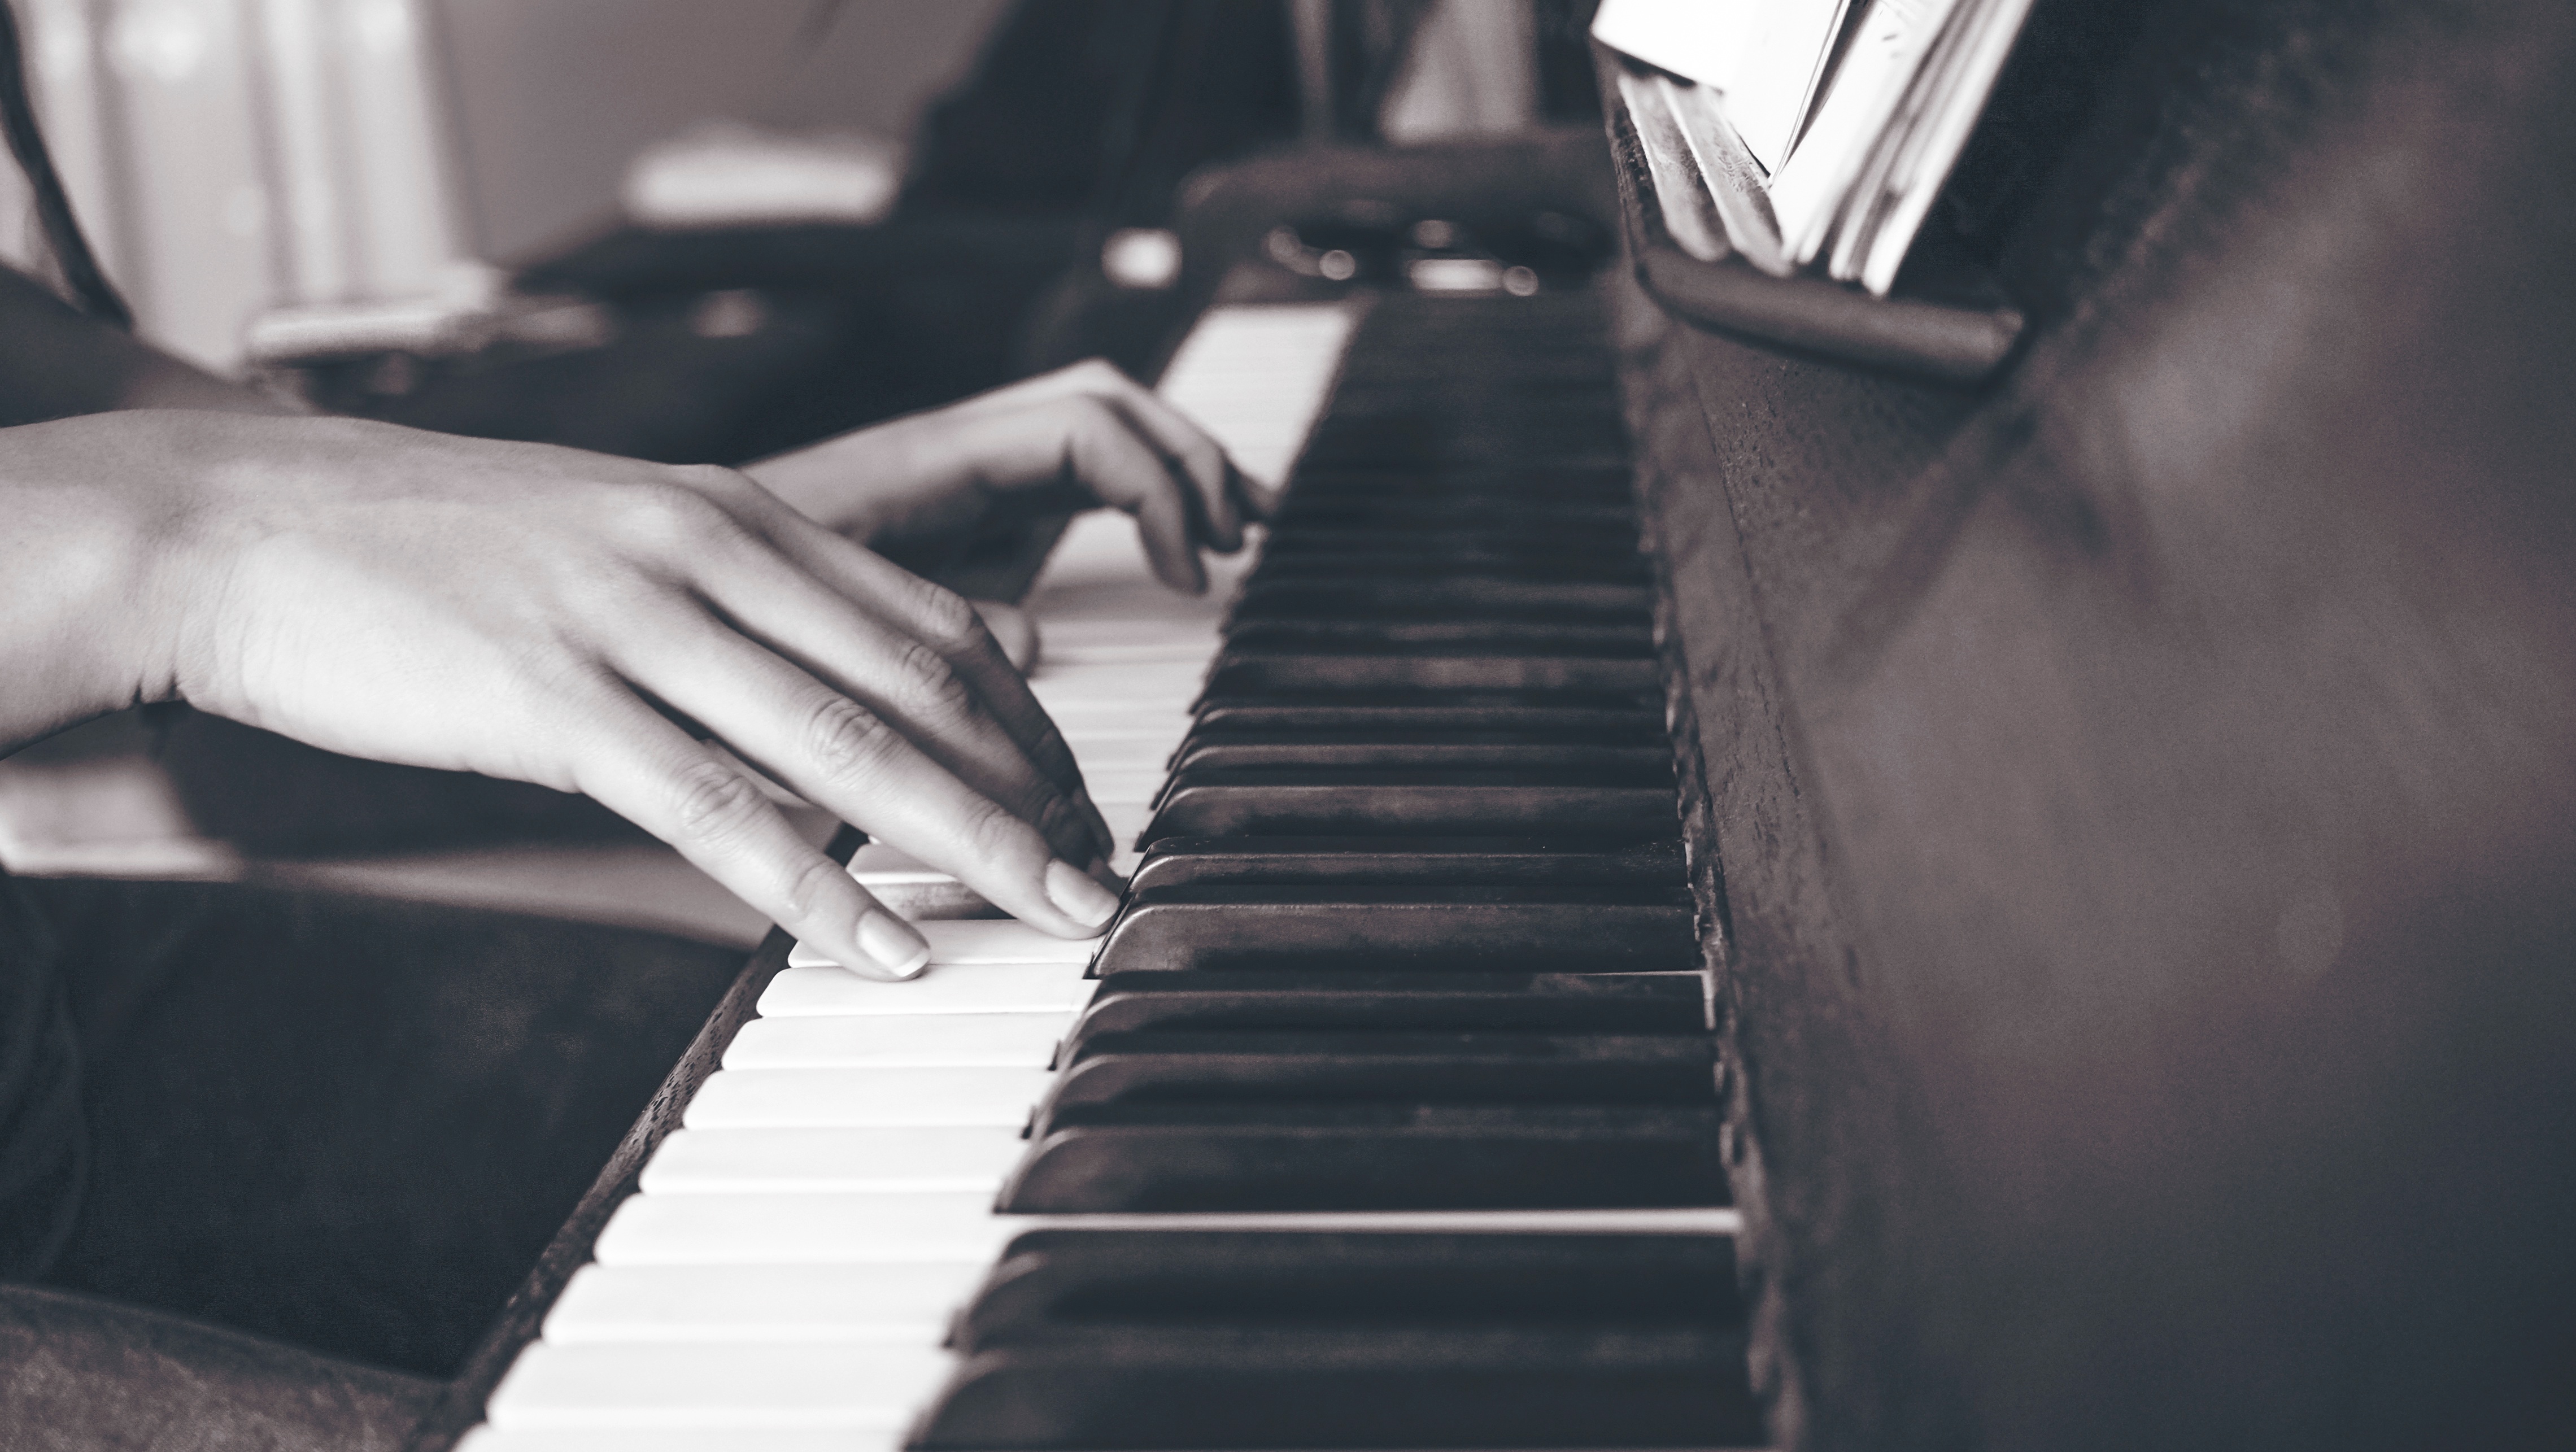 bw, piano, music, hands, chb, keys wallpapers for tablet